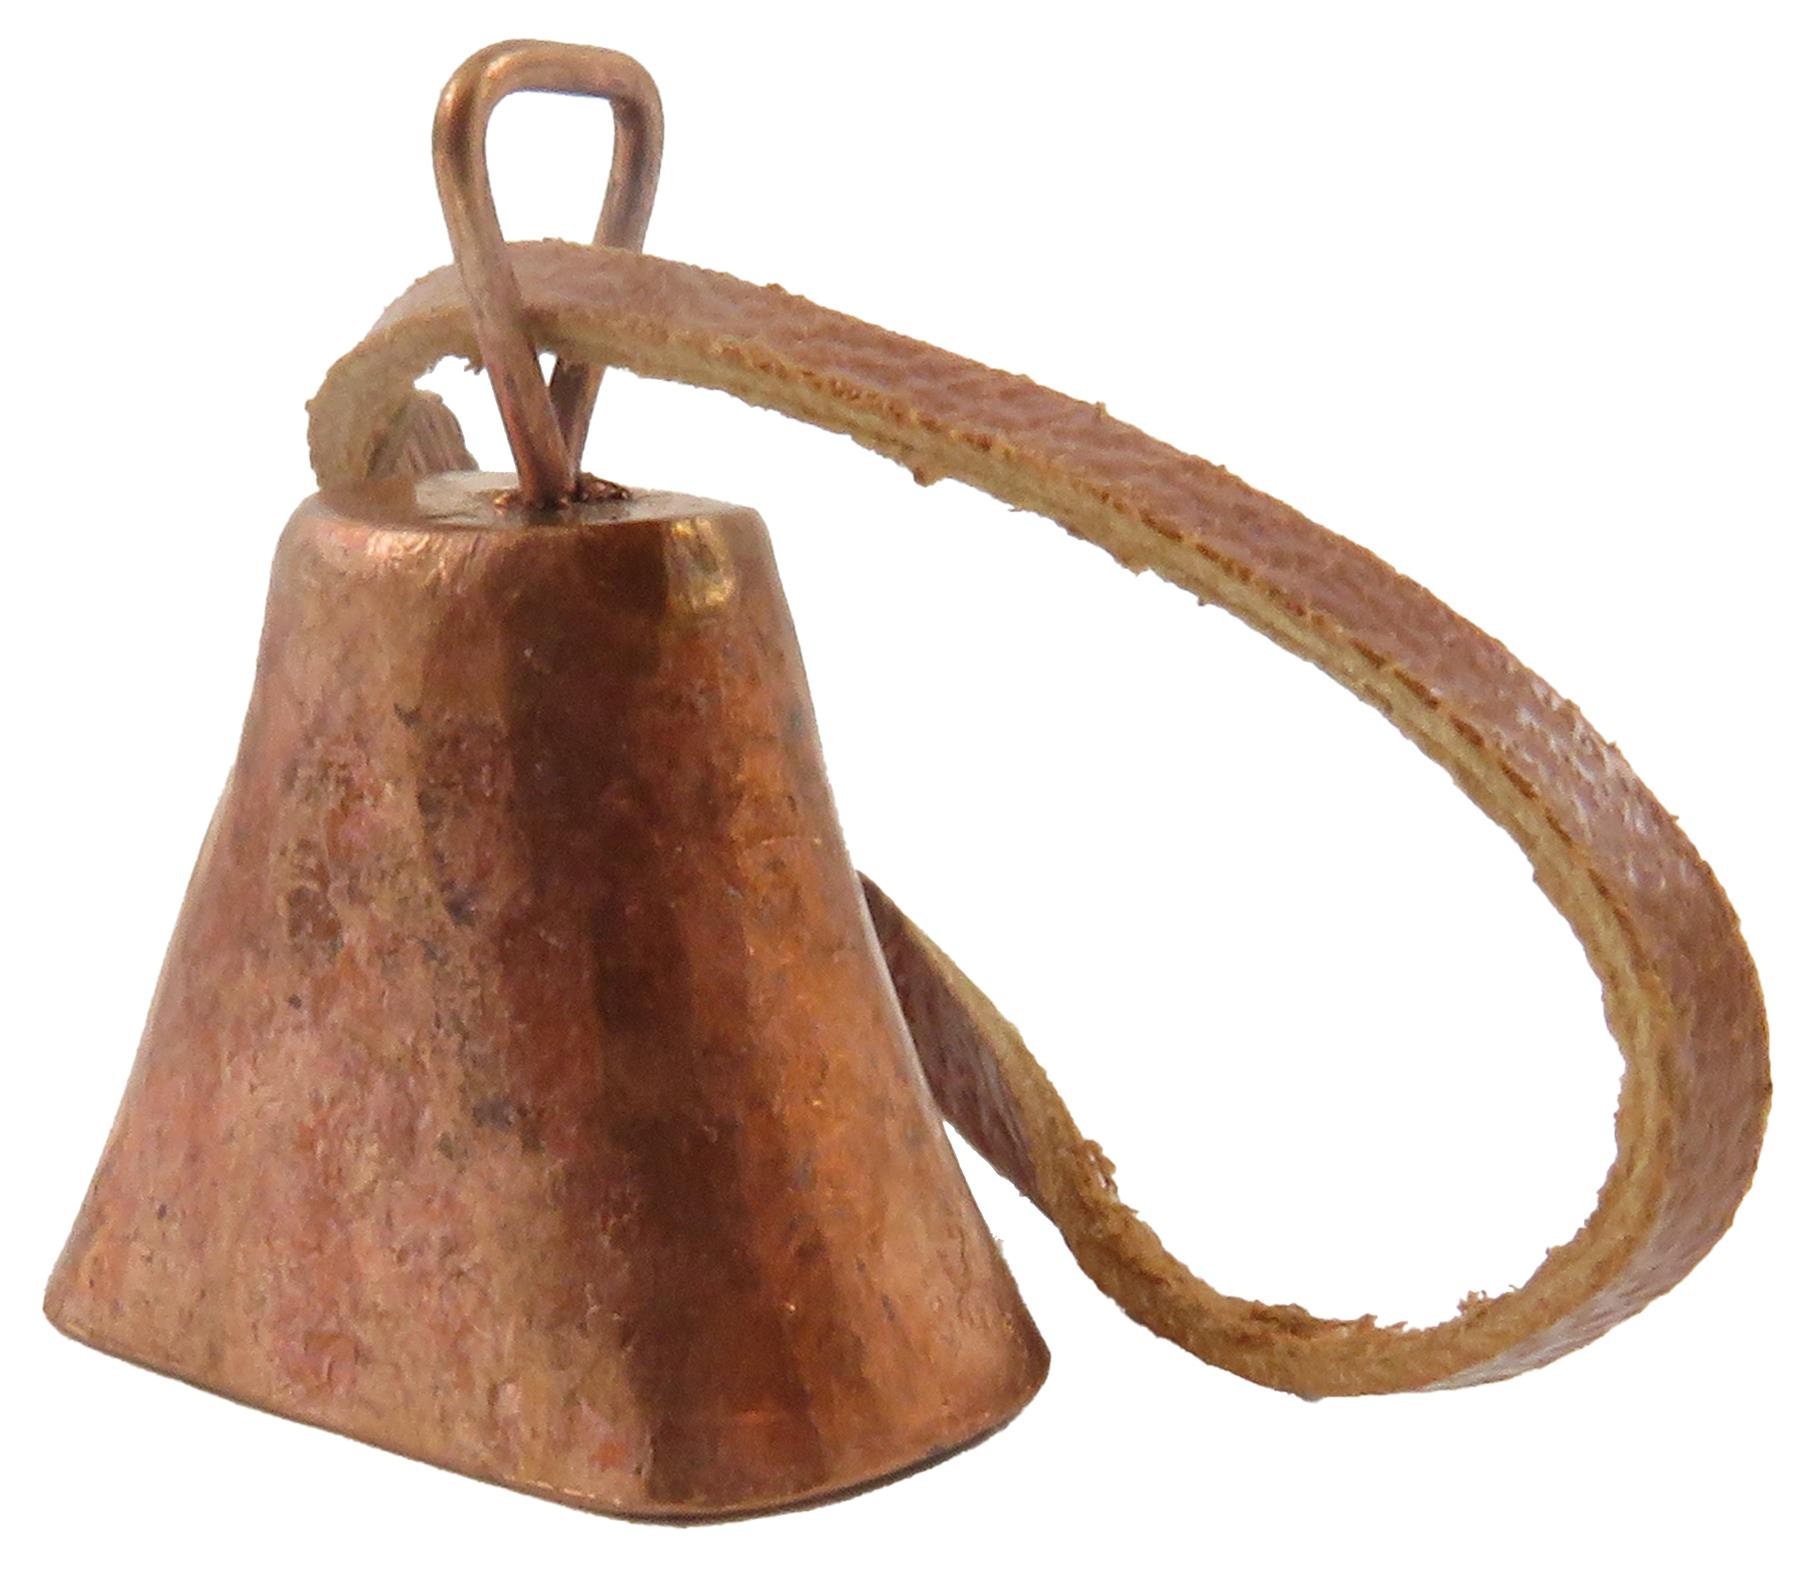 Dolls House Pioneer Copper Cowbell Cow Bell Stable Farm Yard Animal  Accessory -  Finland